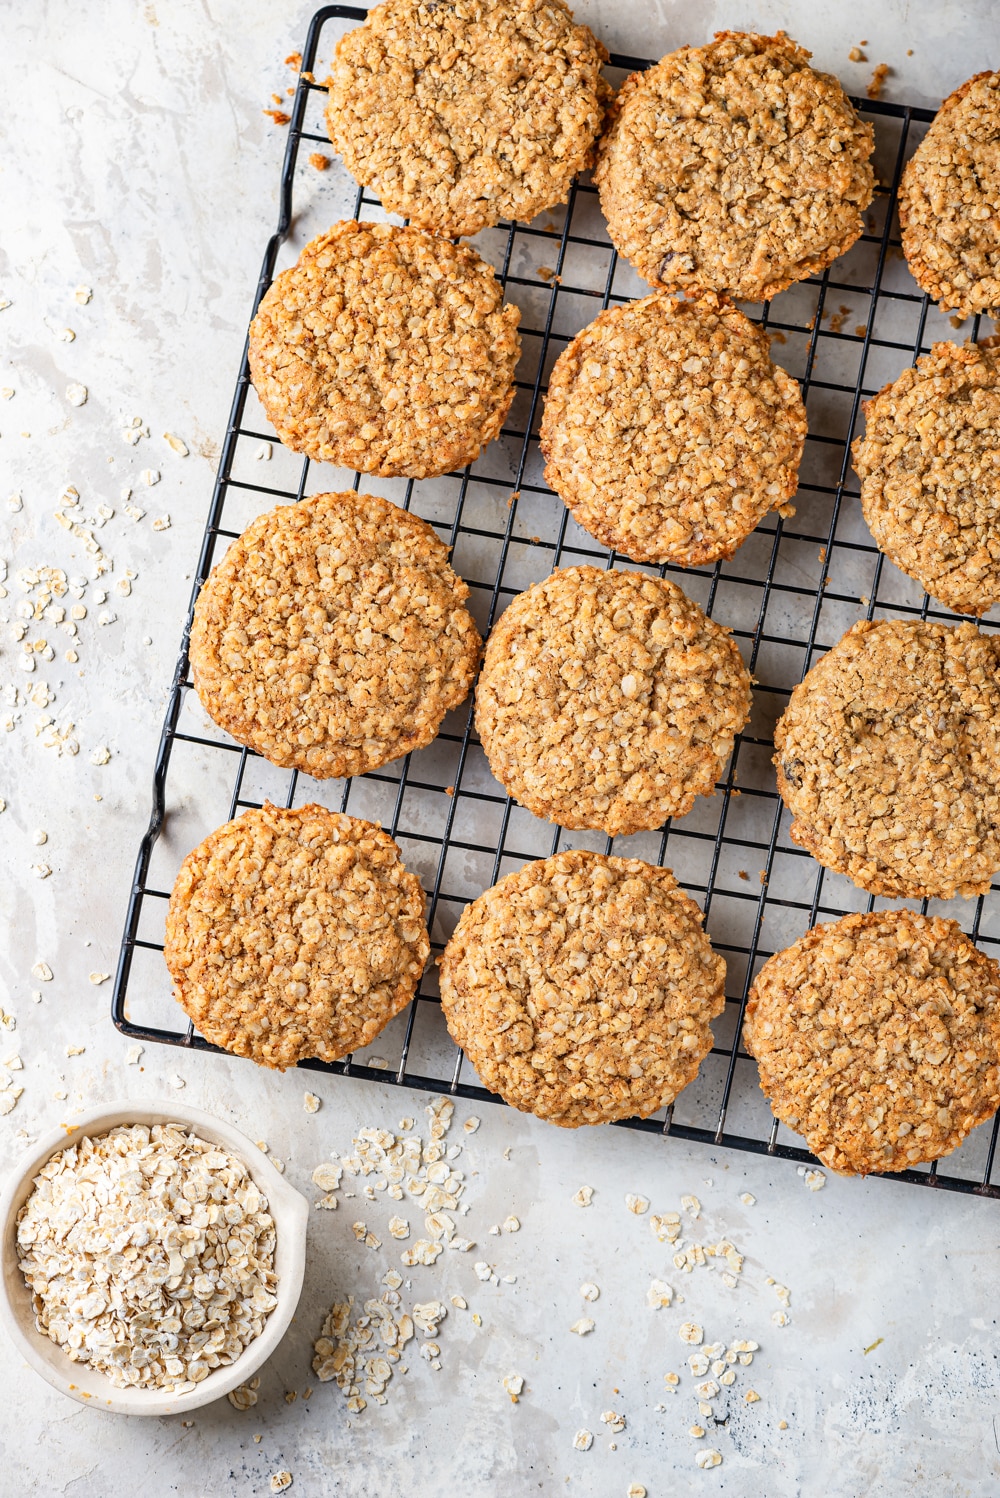 An overhead view of three rows of four vegan oatmeal cookies sitting on a black wire rack. A small white bowl of oats is set in front of the wire rack, with a few oats on scattered on the white counter everything is sitting on.